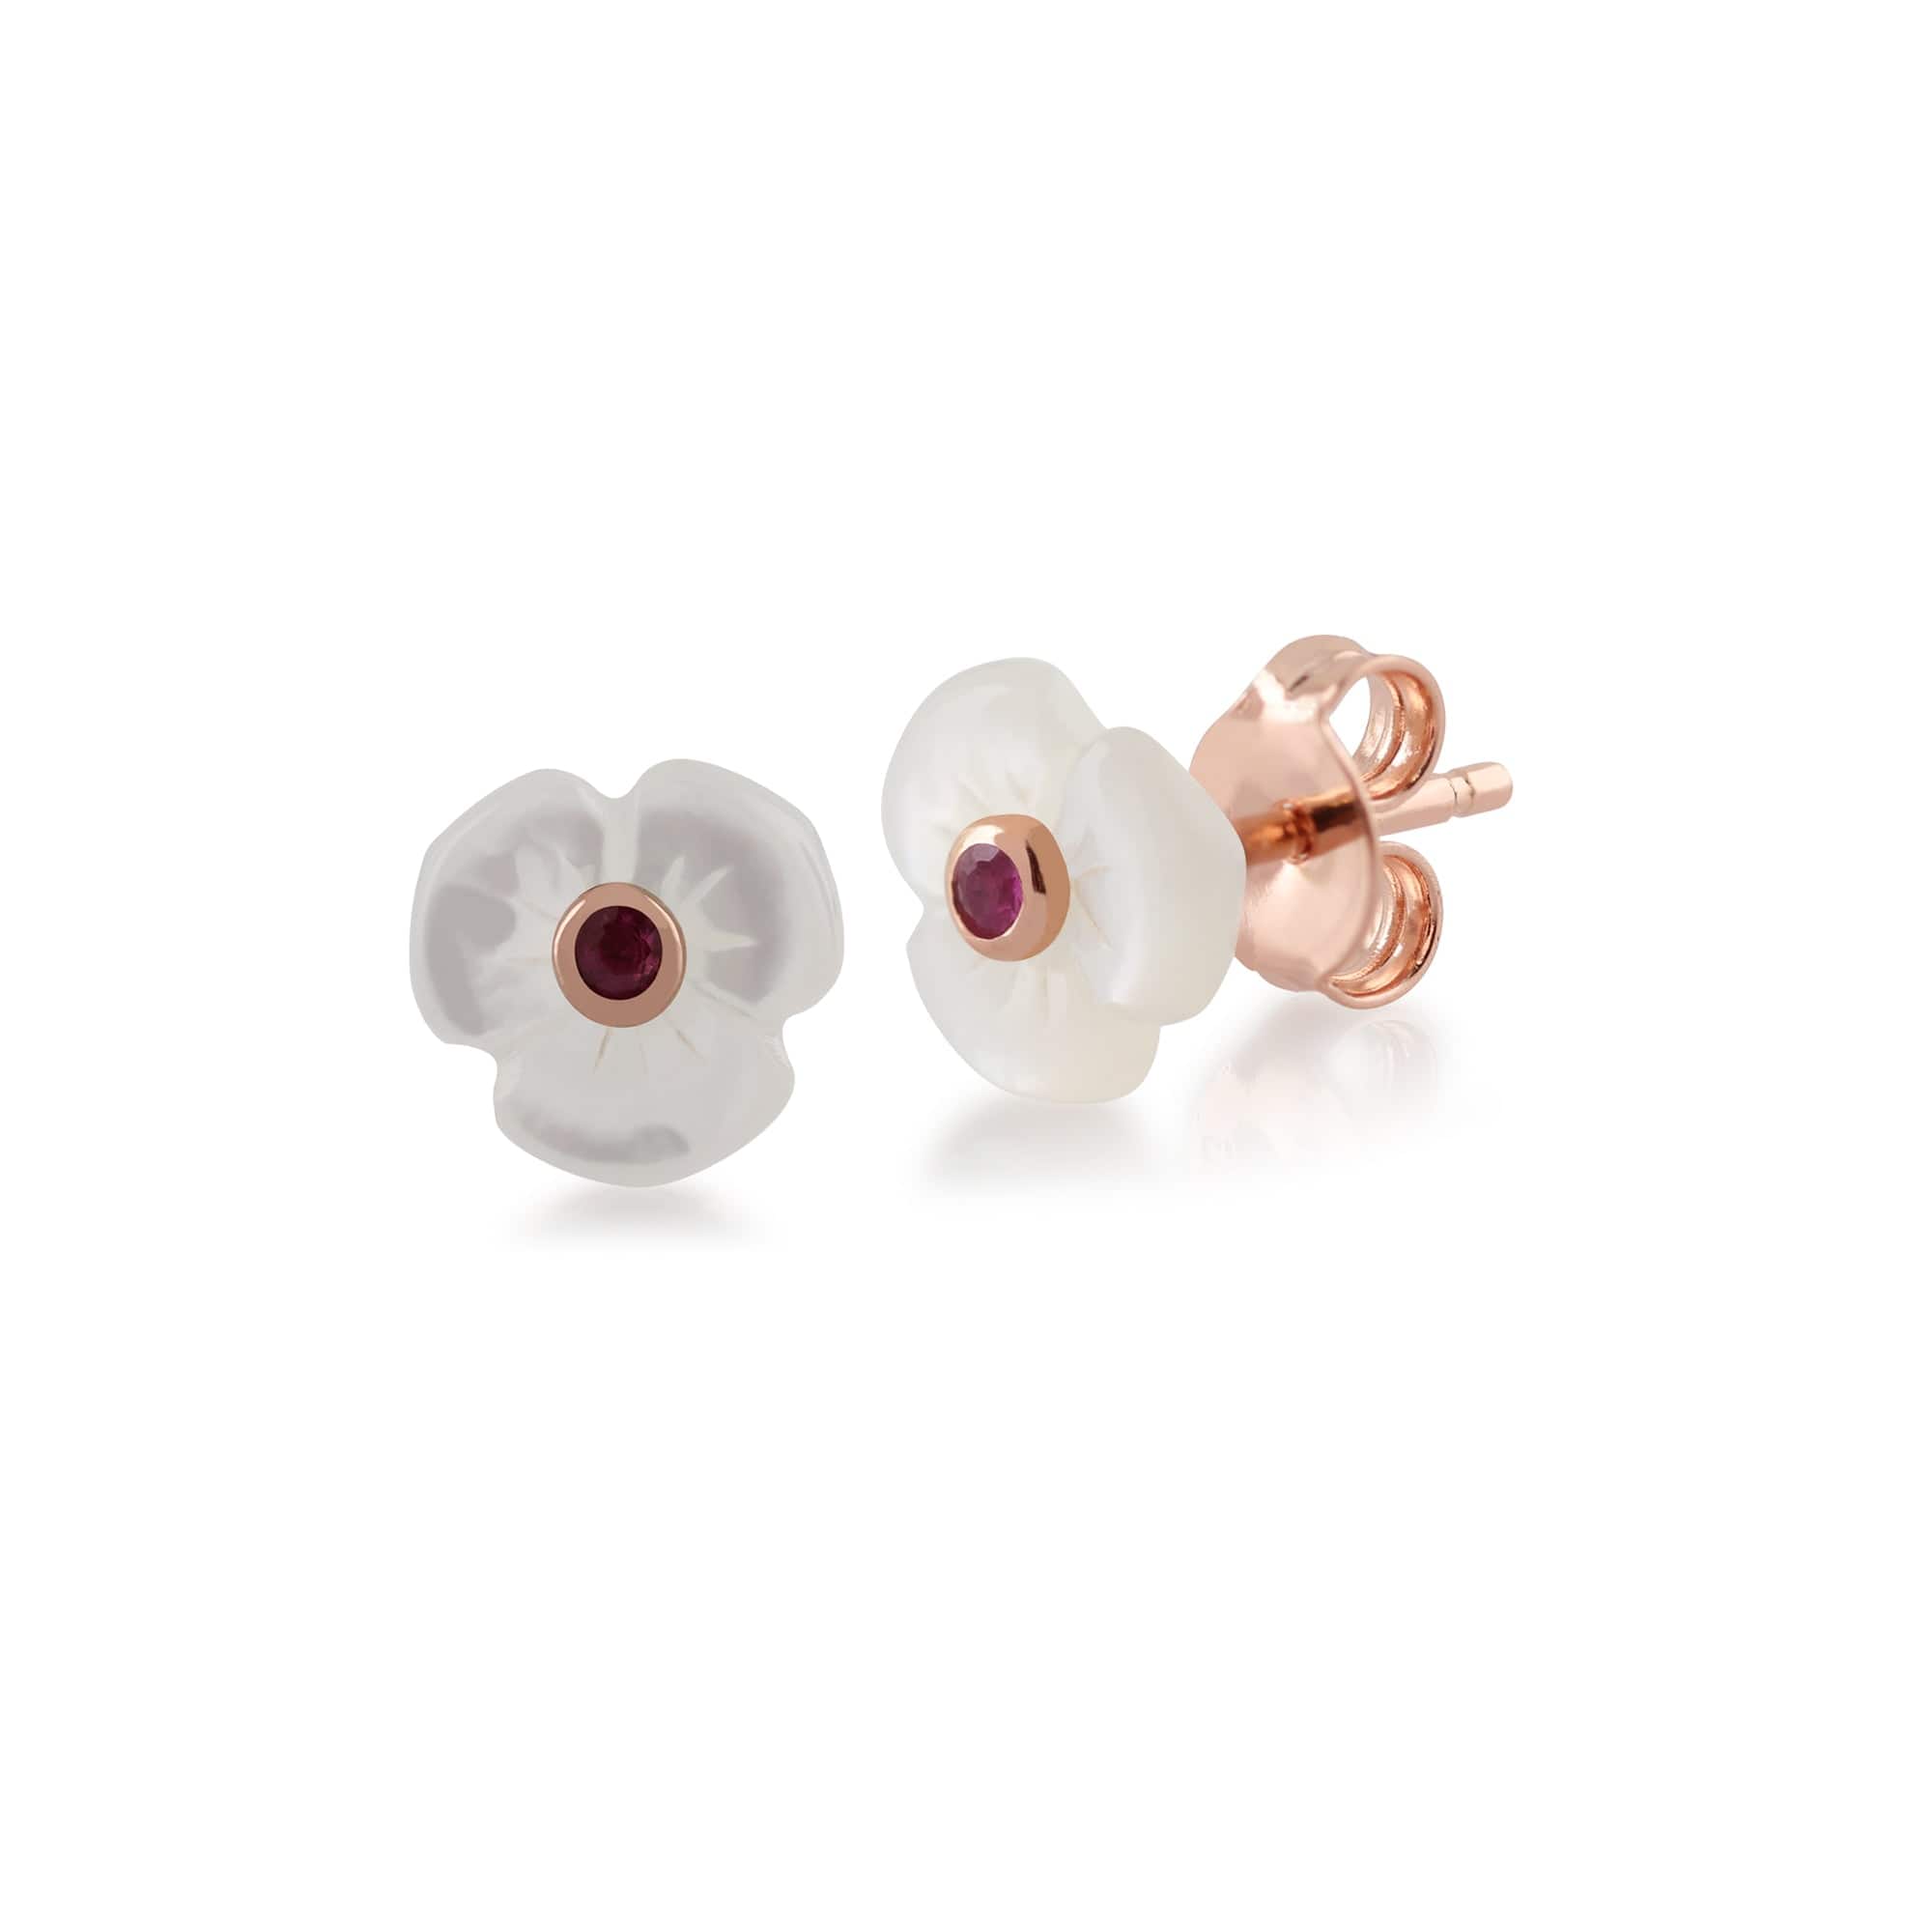 Floral Mother of Pearl & Round Ruby Poppy Stud Earrings in Rose Gold Plated 925 Sterling Silver - Gemondo